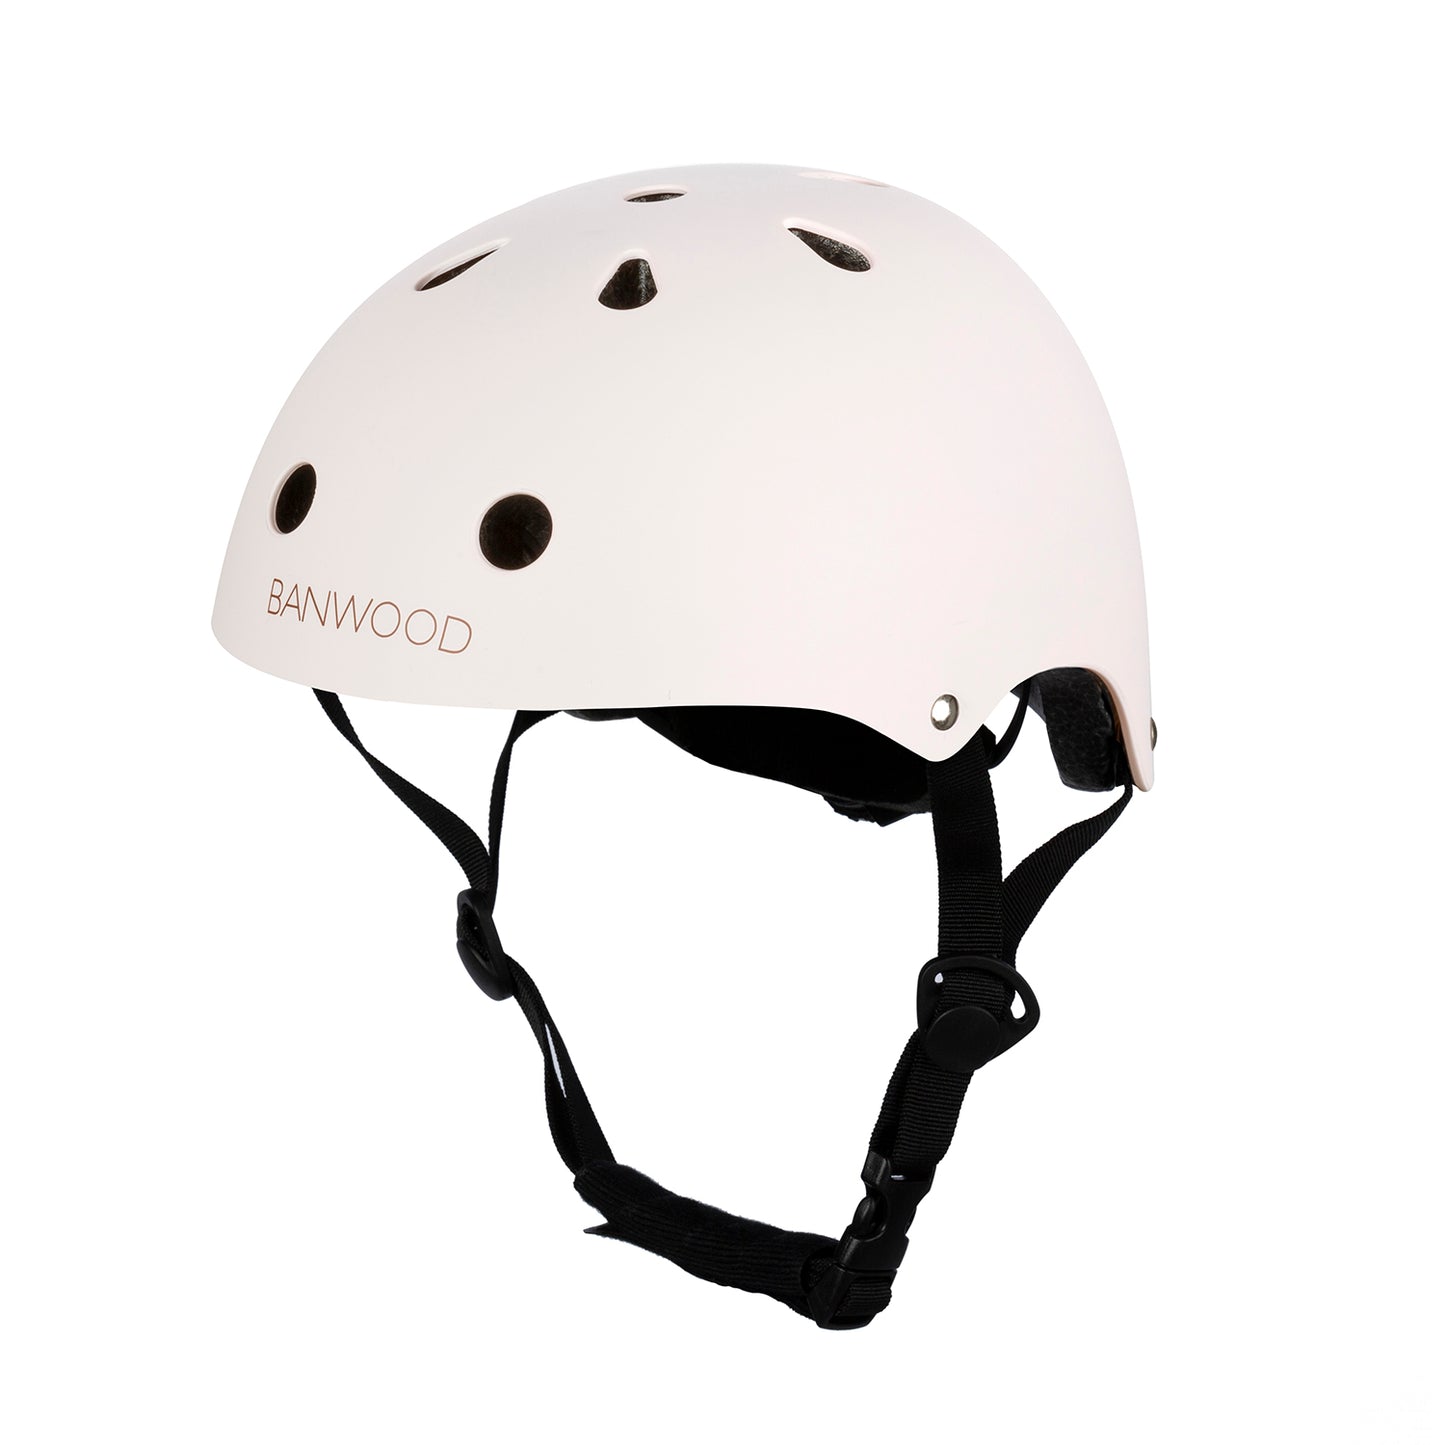 Classic Helmet - Matte Pale Pink - pre-order now / back in stock End of February